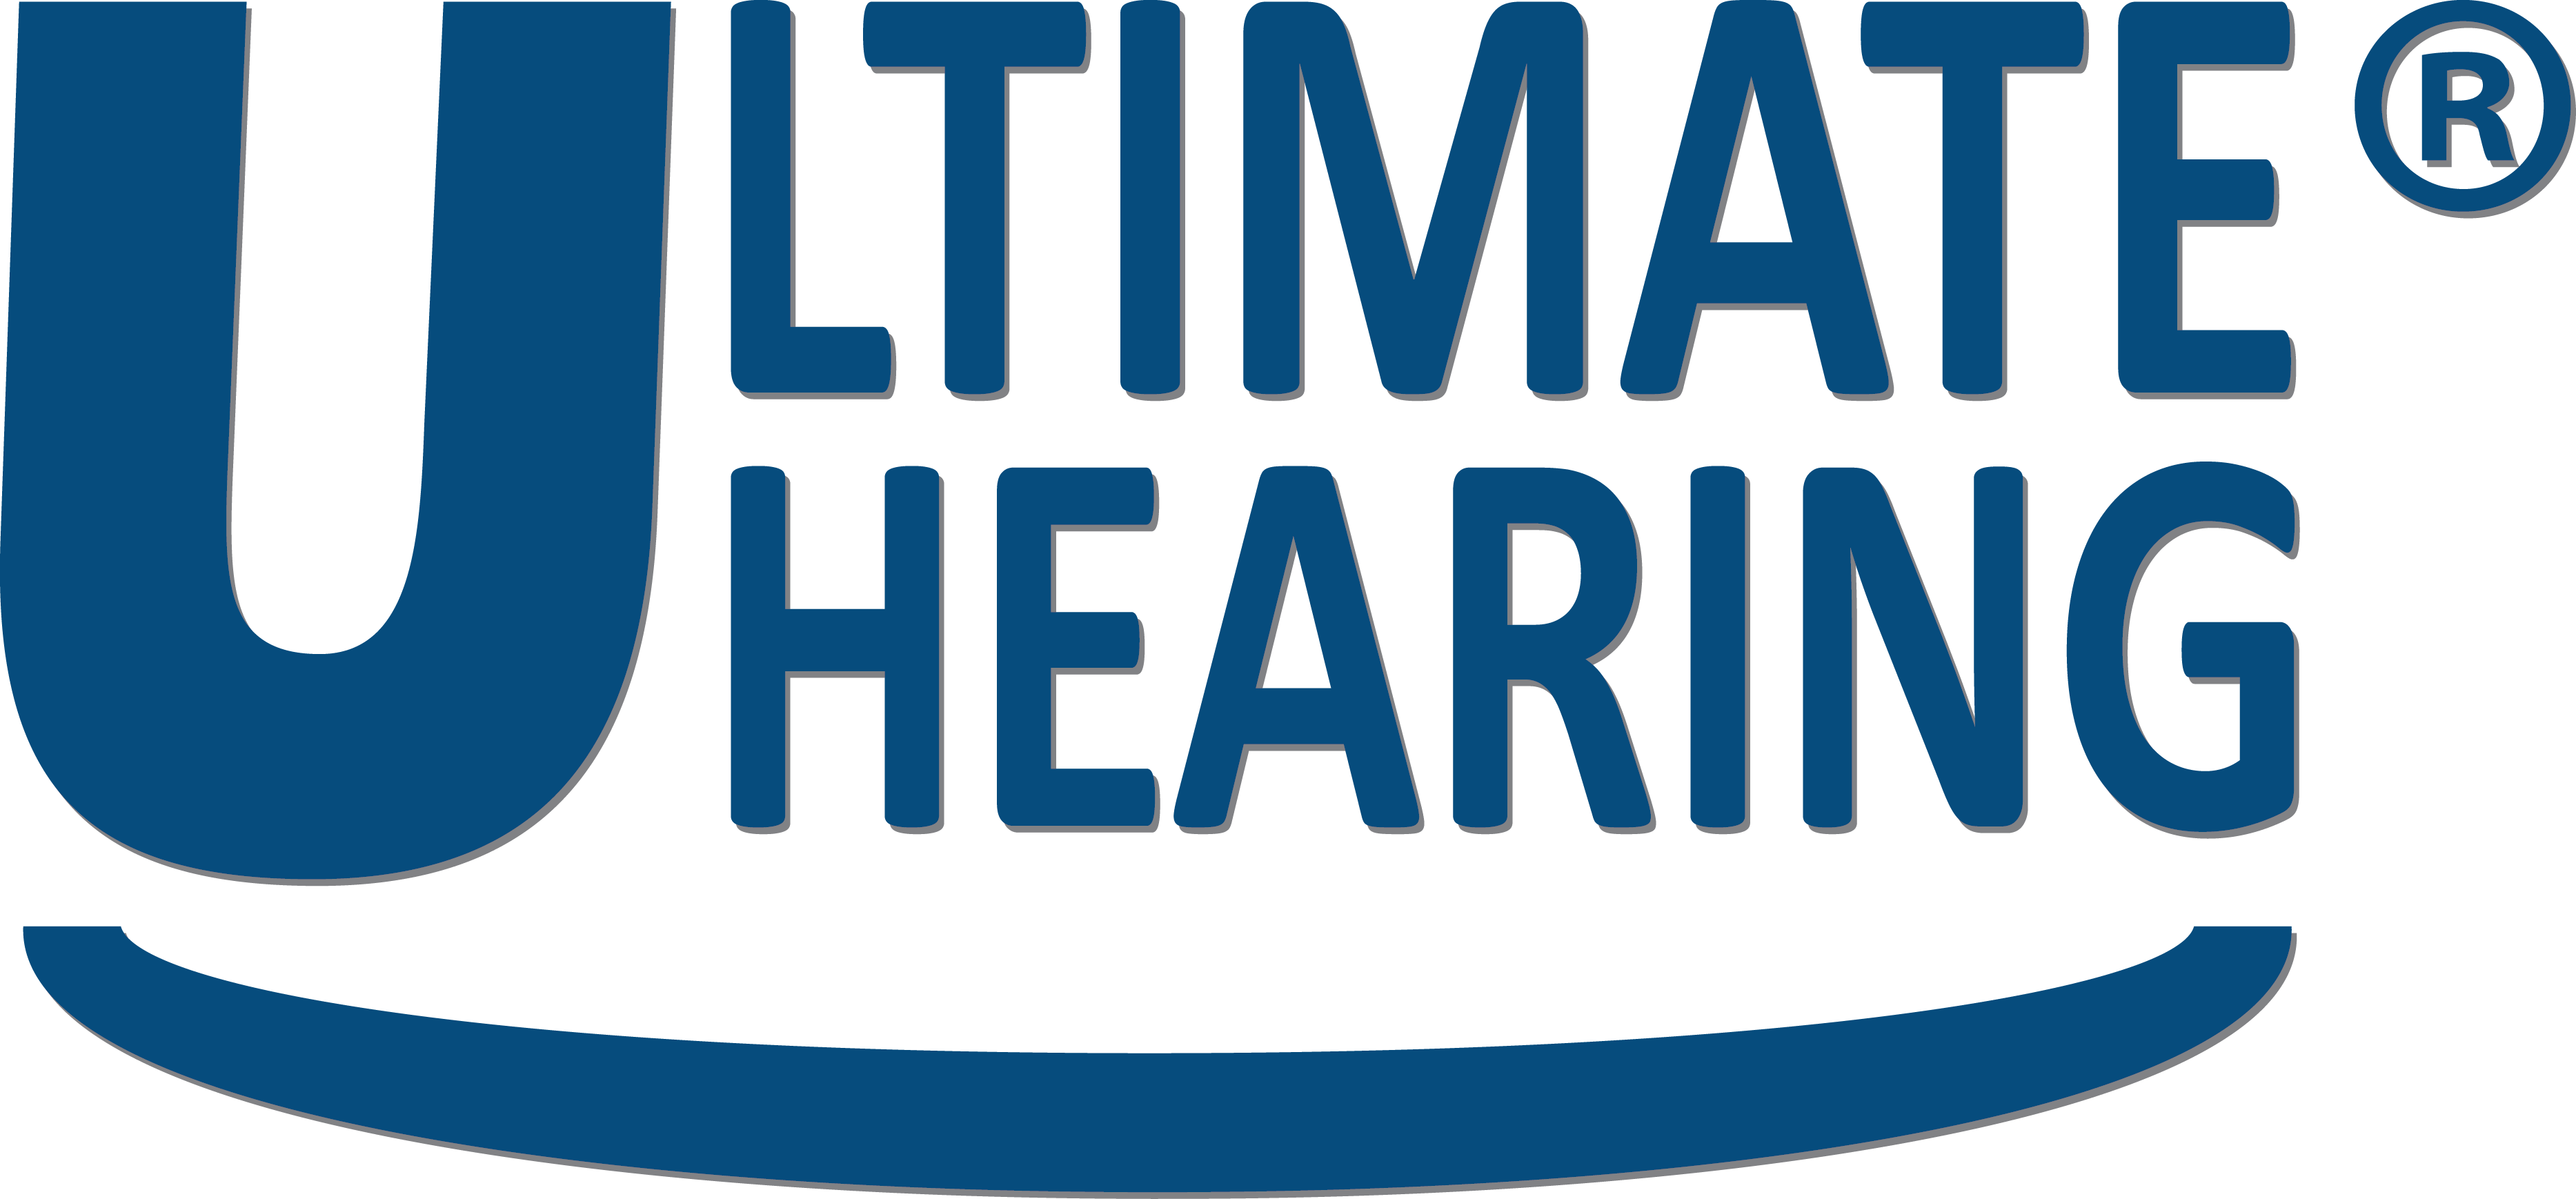 Ultimate Hearing Centers in Tennessee